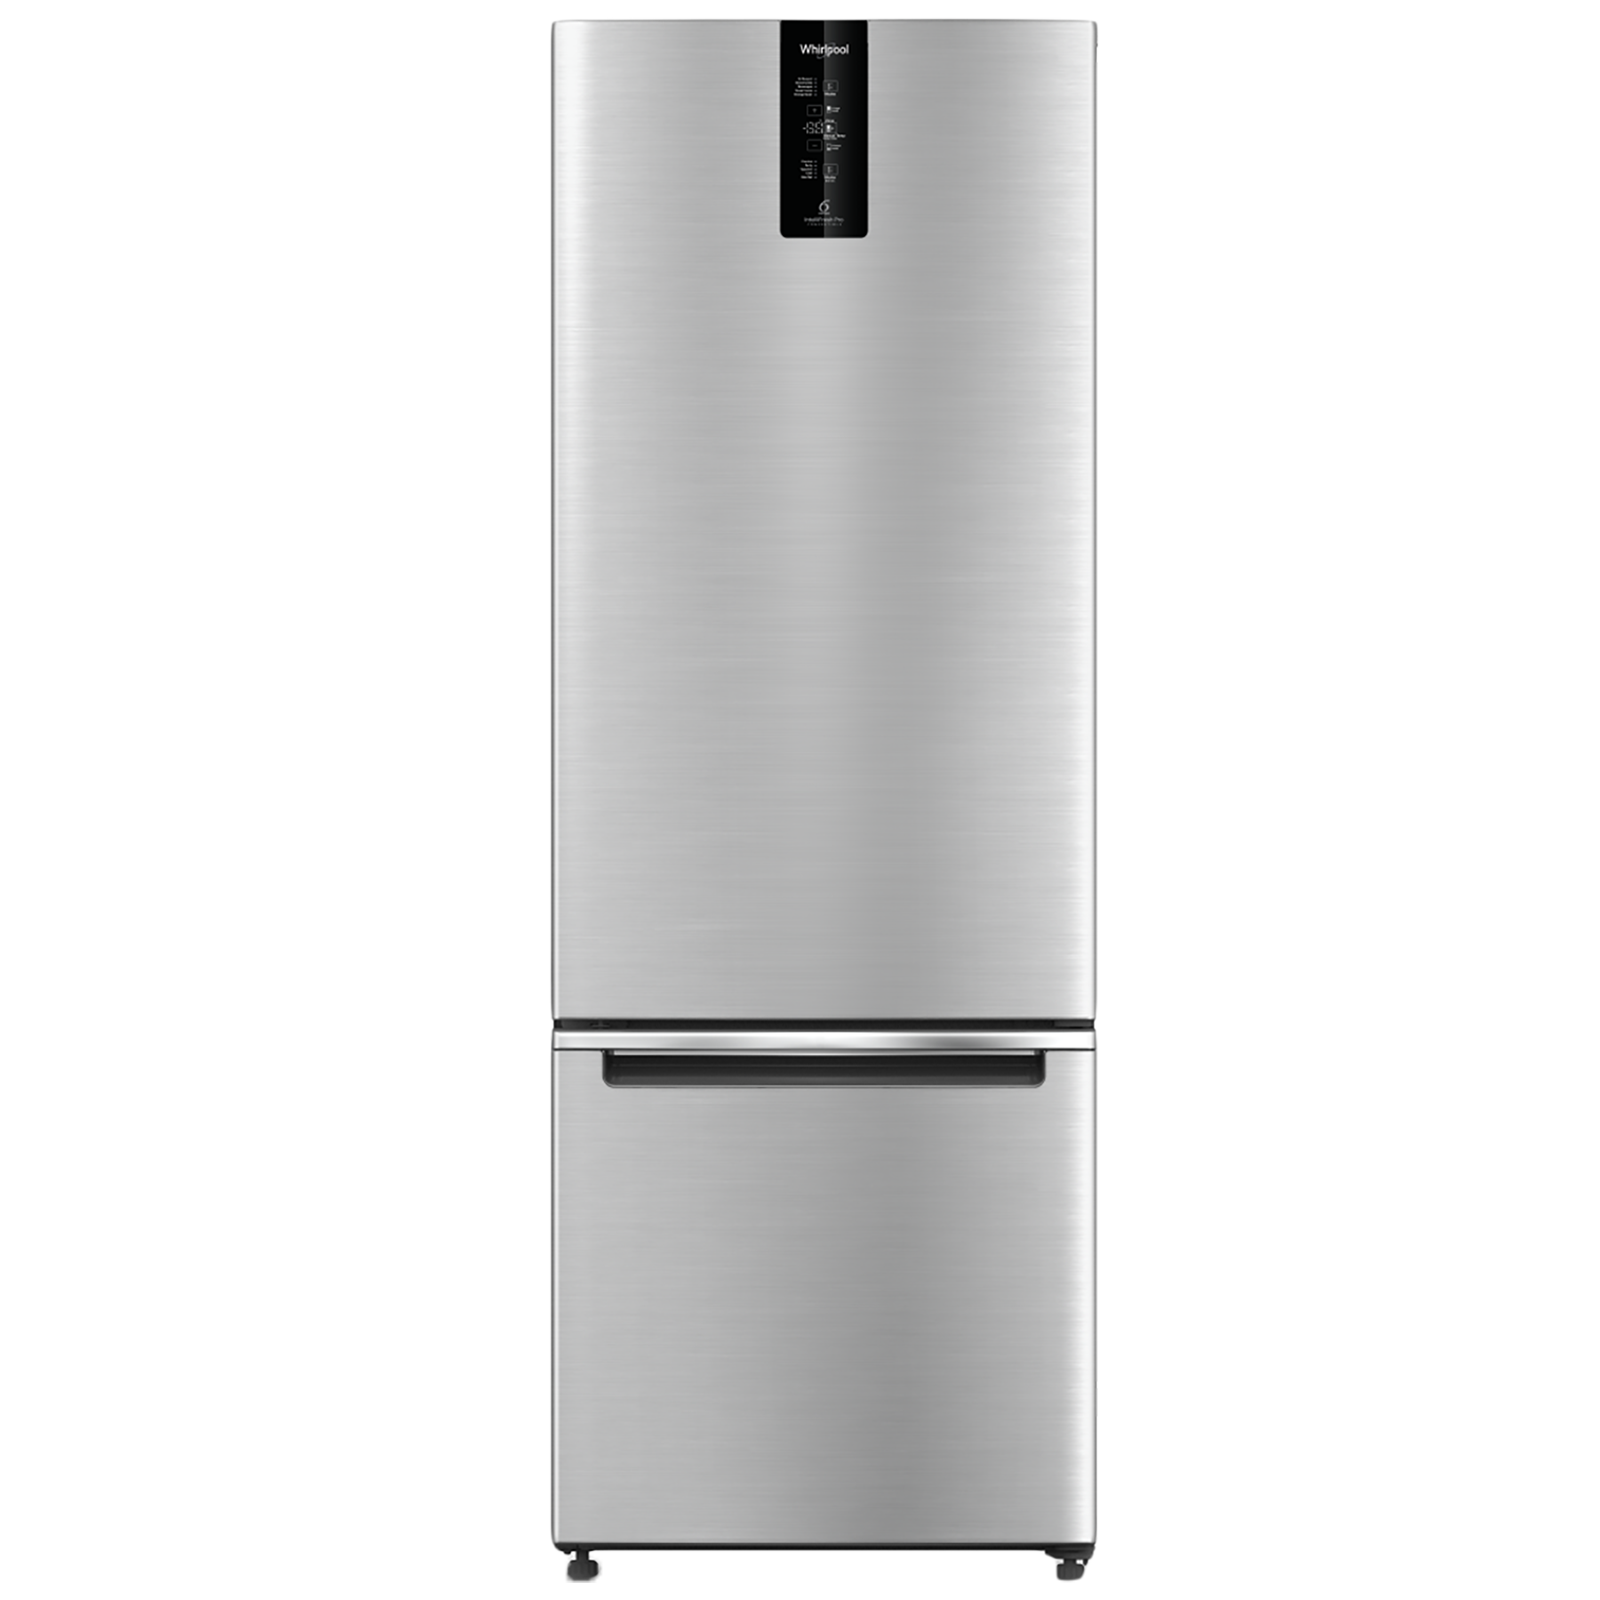 Whirlpool Intellifresh Pro 355 Litres 3 Star Frost Free Double Door Bottom Mount Convertible Refrigerator with MicroBlock Technology (IFPRO BM INV CNV...